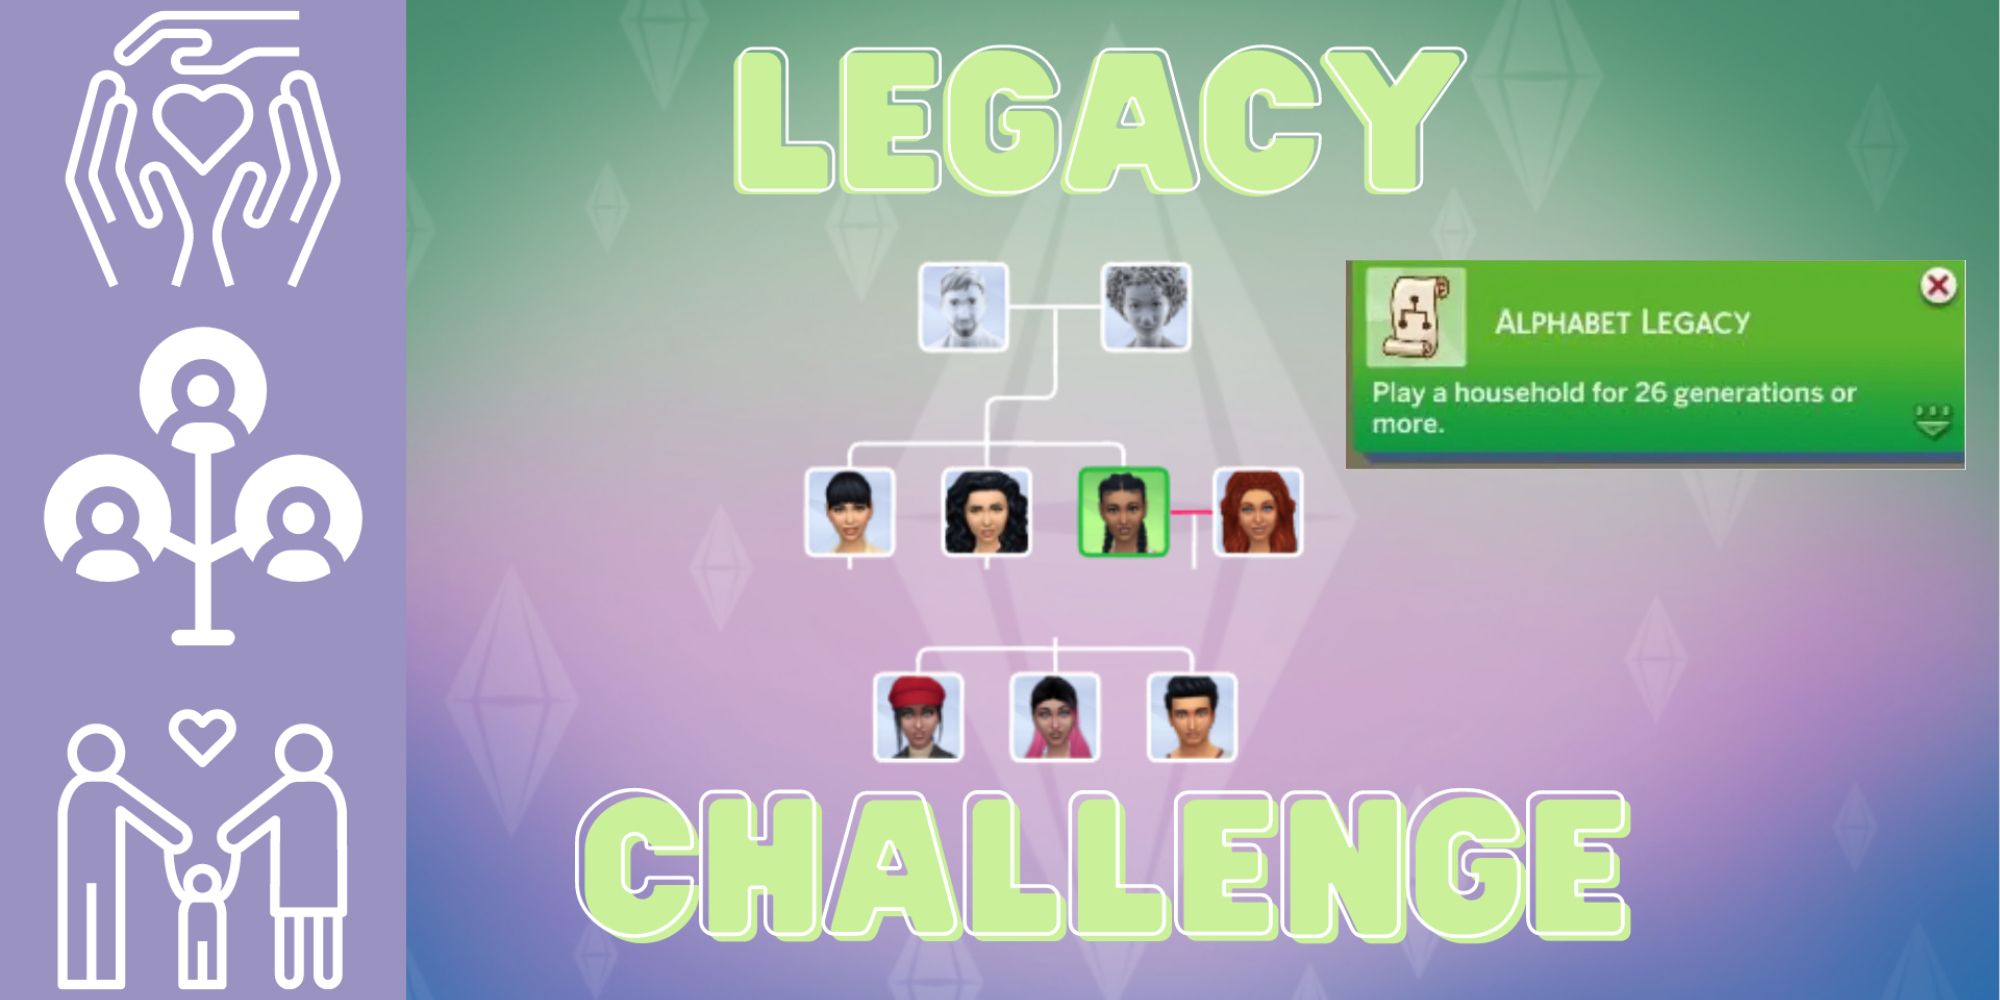 A geneology tree from The Sims 4 as it relates to the Alphabet Legacy Challenge